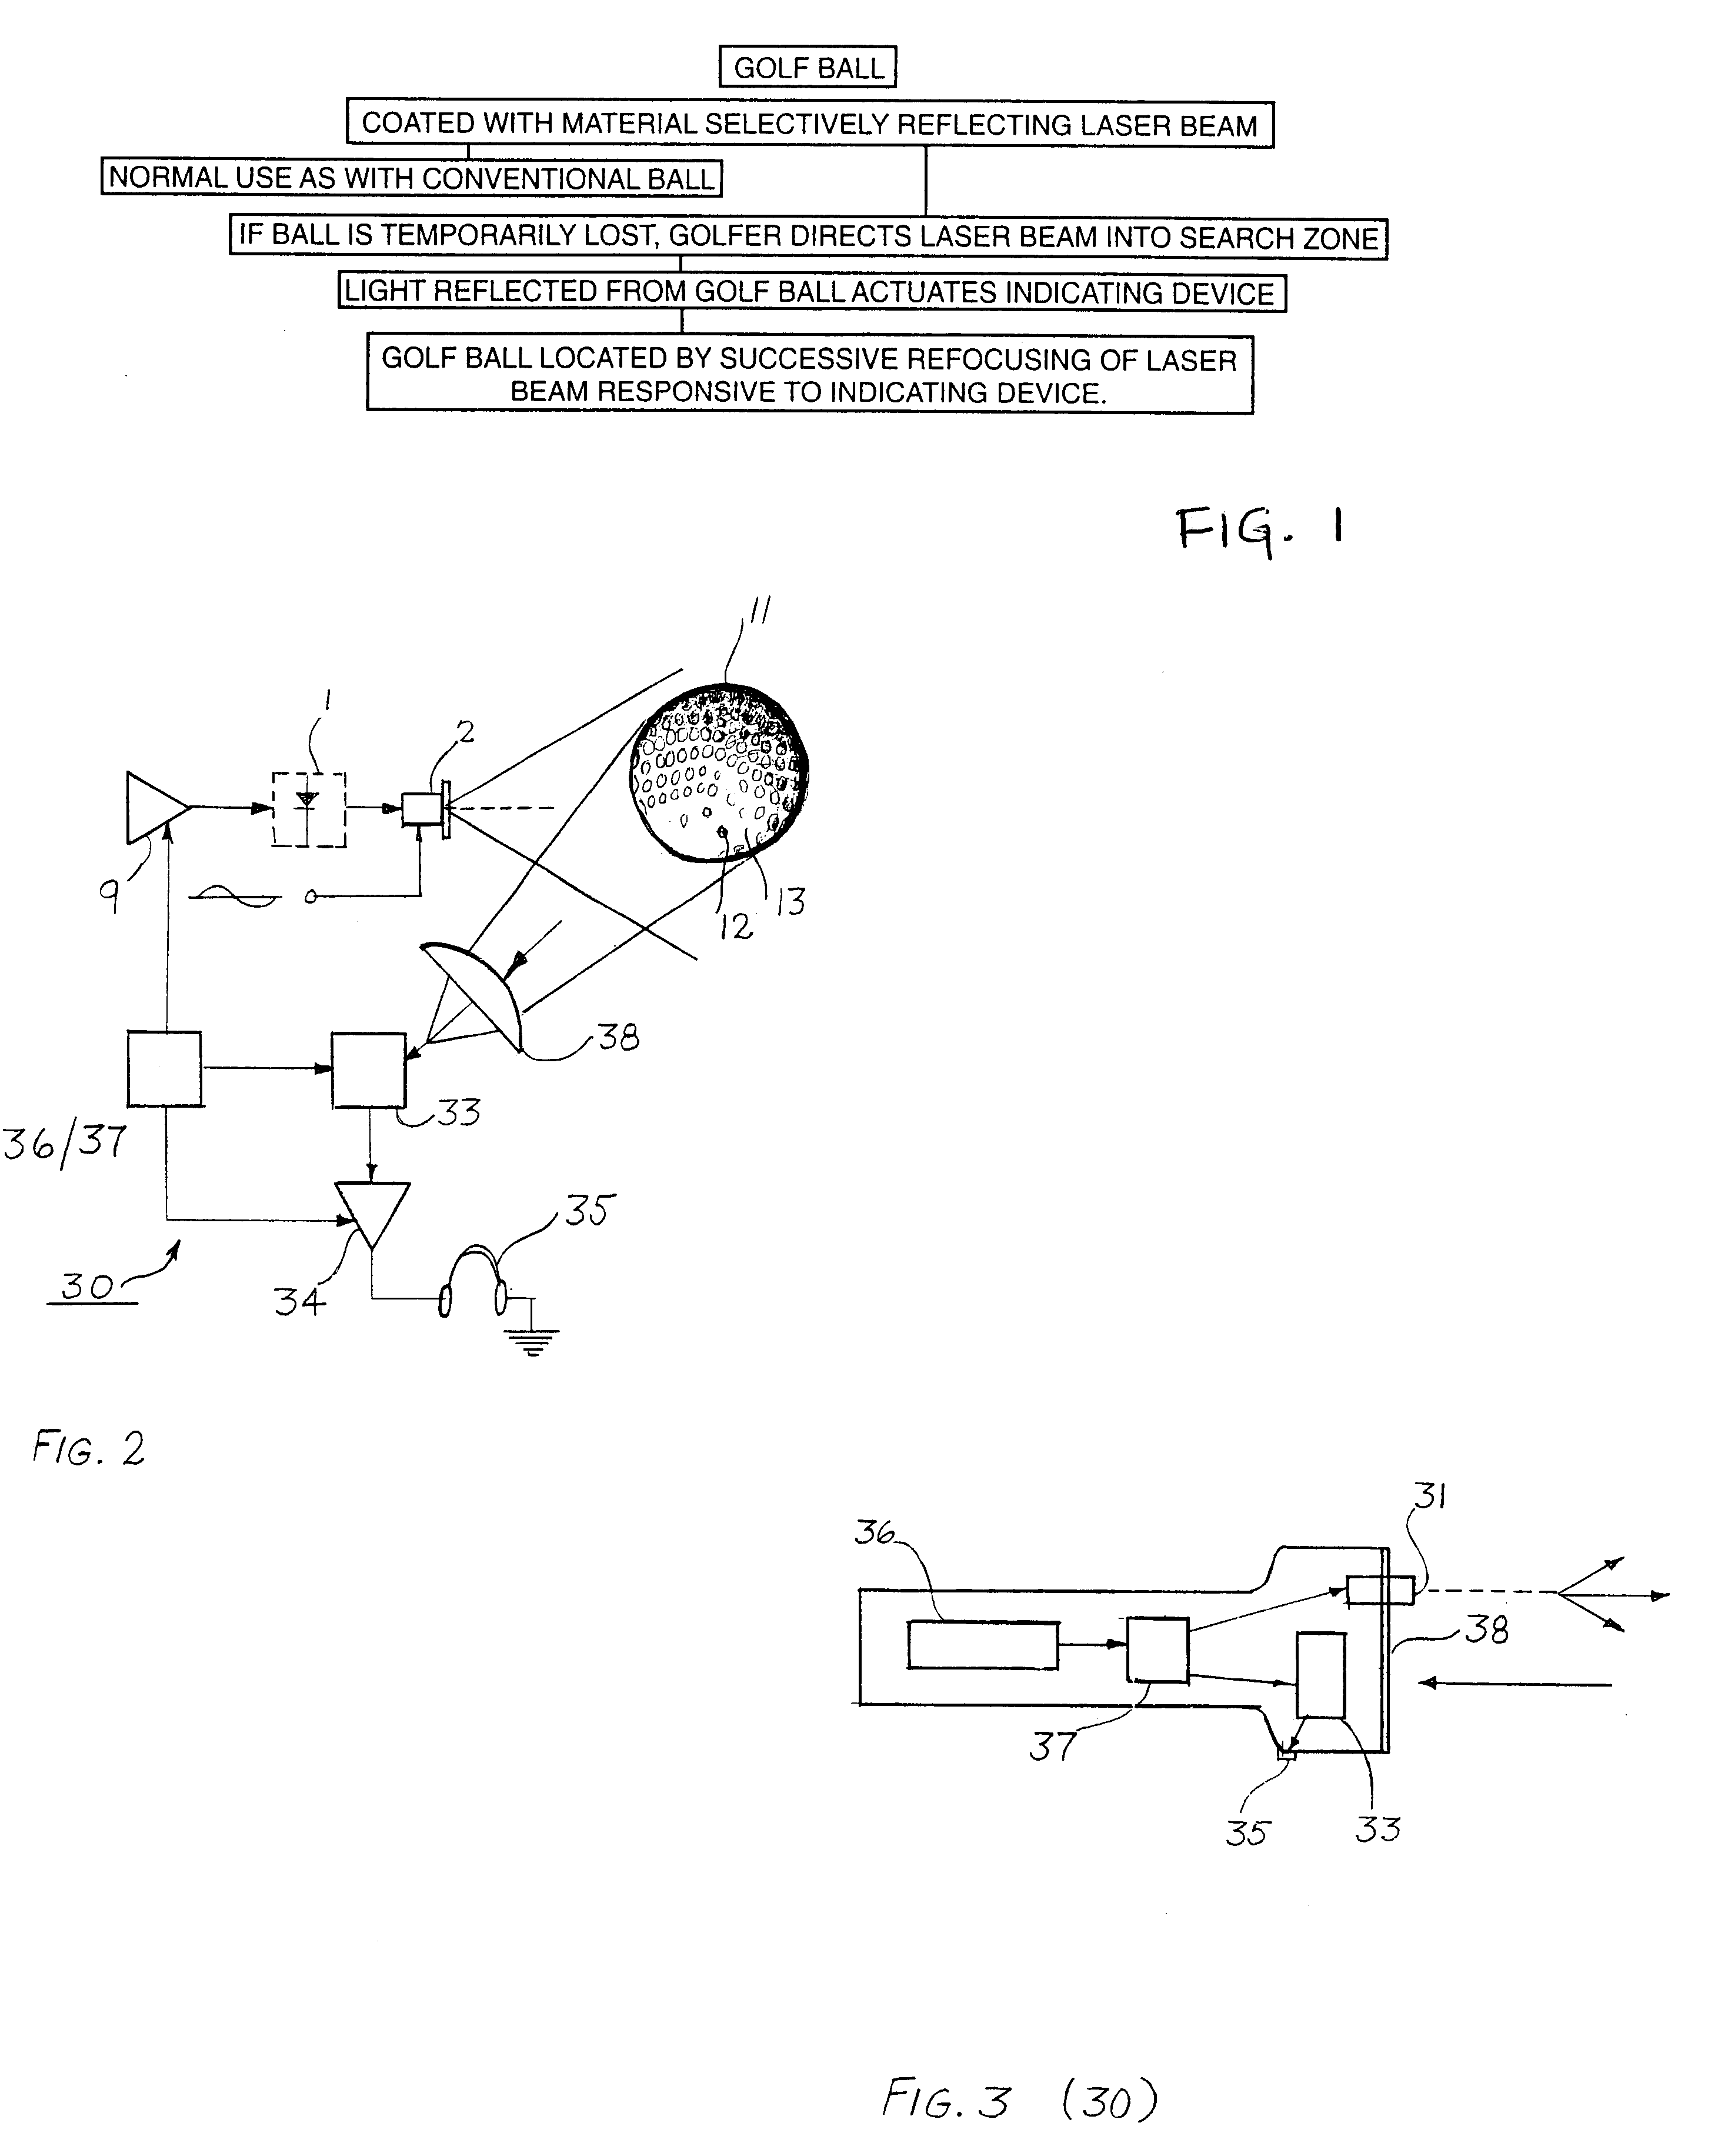 Infra-red laser device and method for searching for lost item